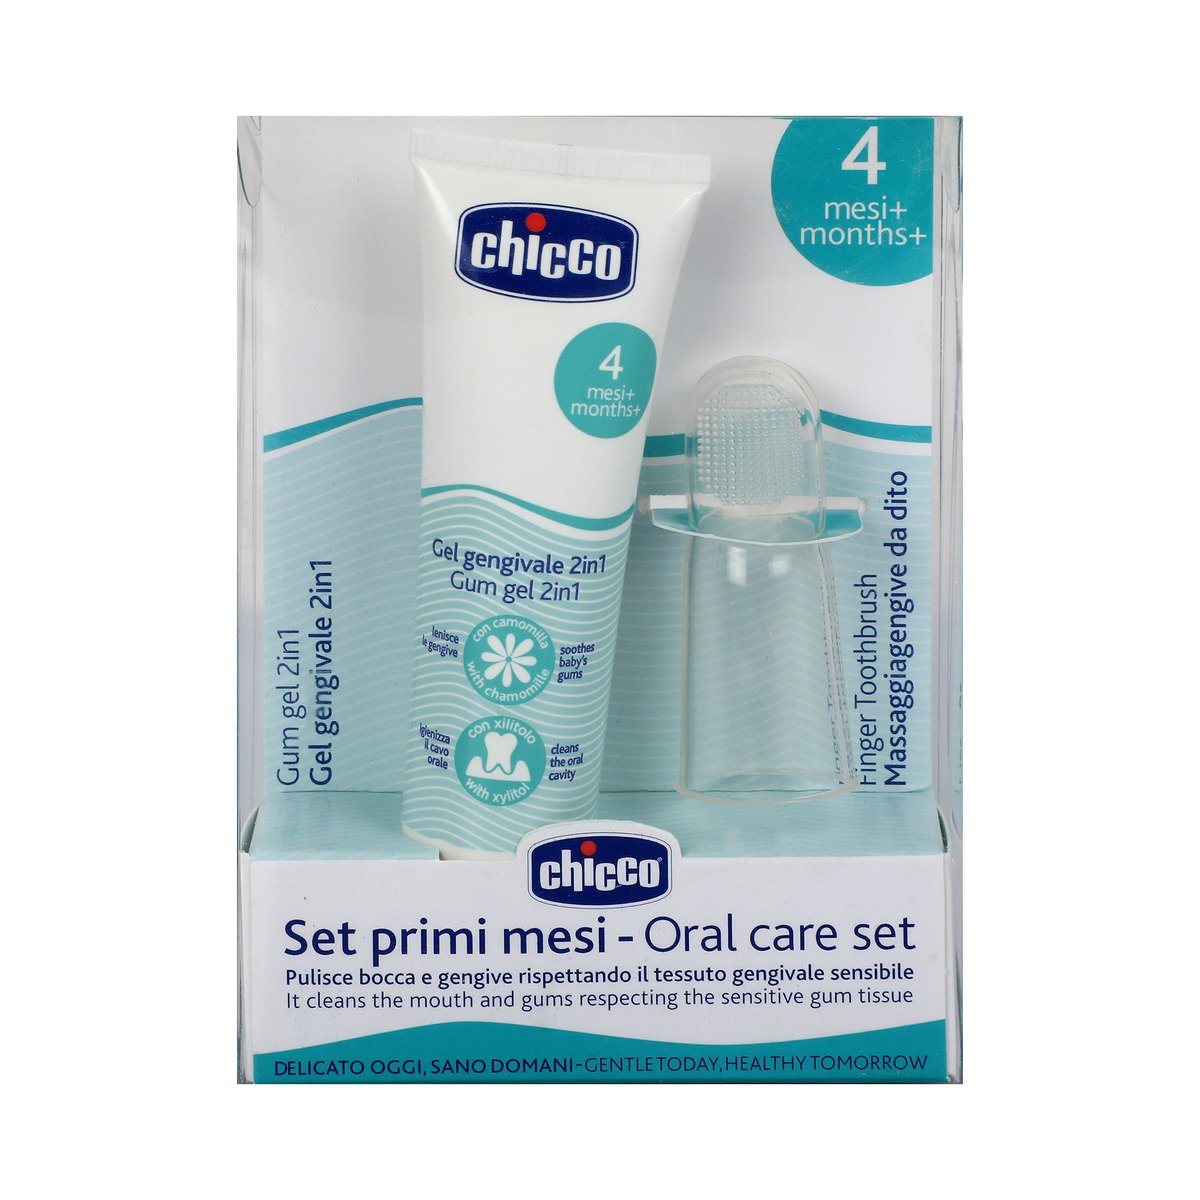 Chicco Oral Care Set 4 Months+ Including Gum Gel 2 In 1 + Finger Toothbrush